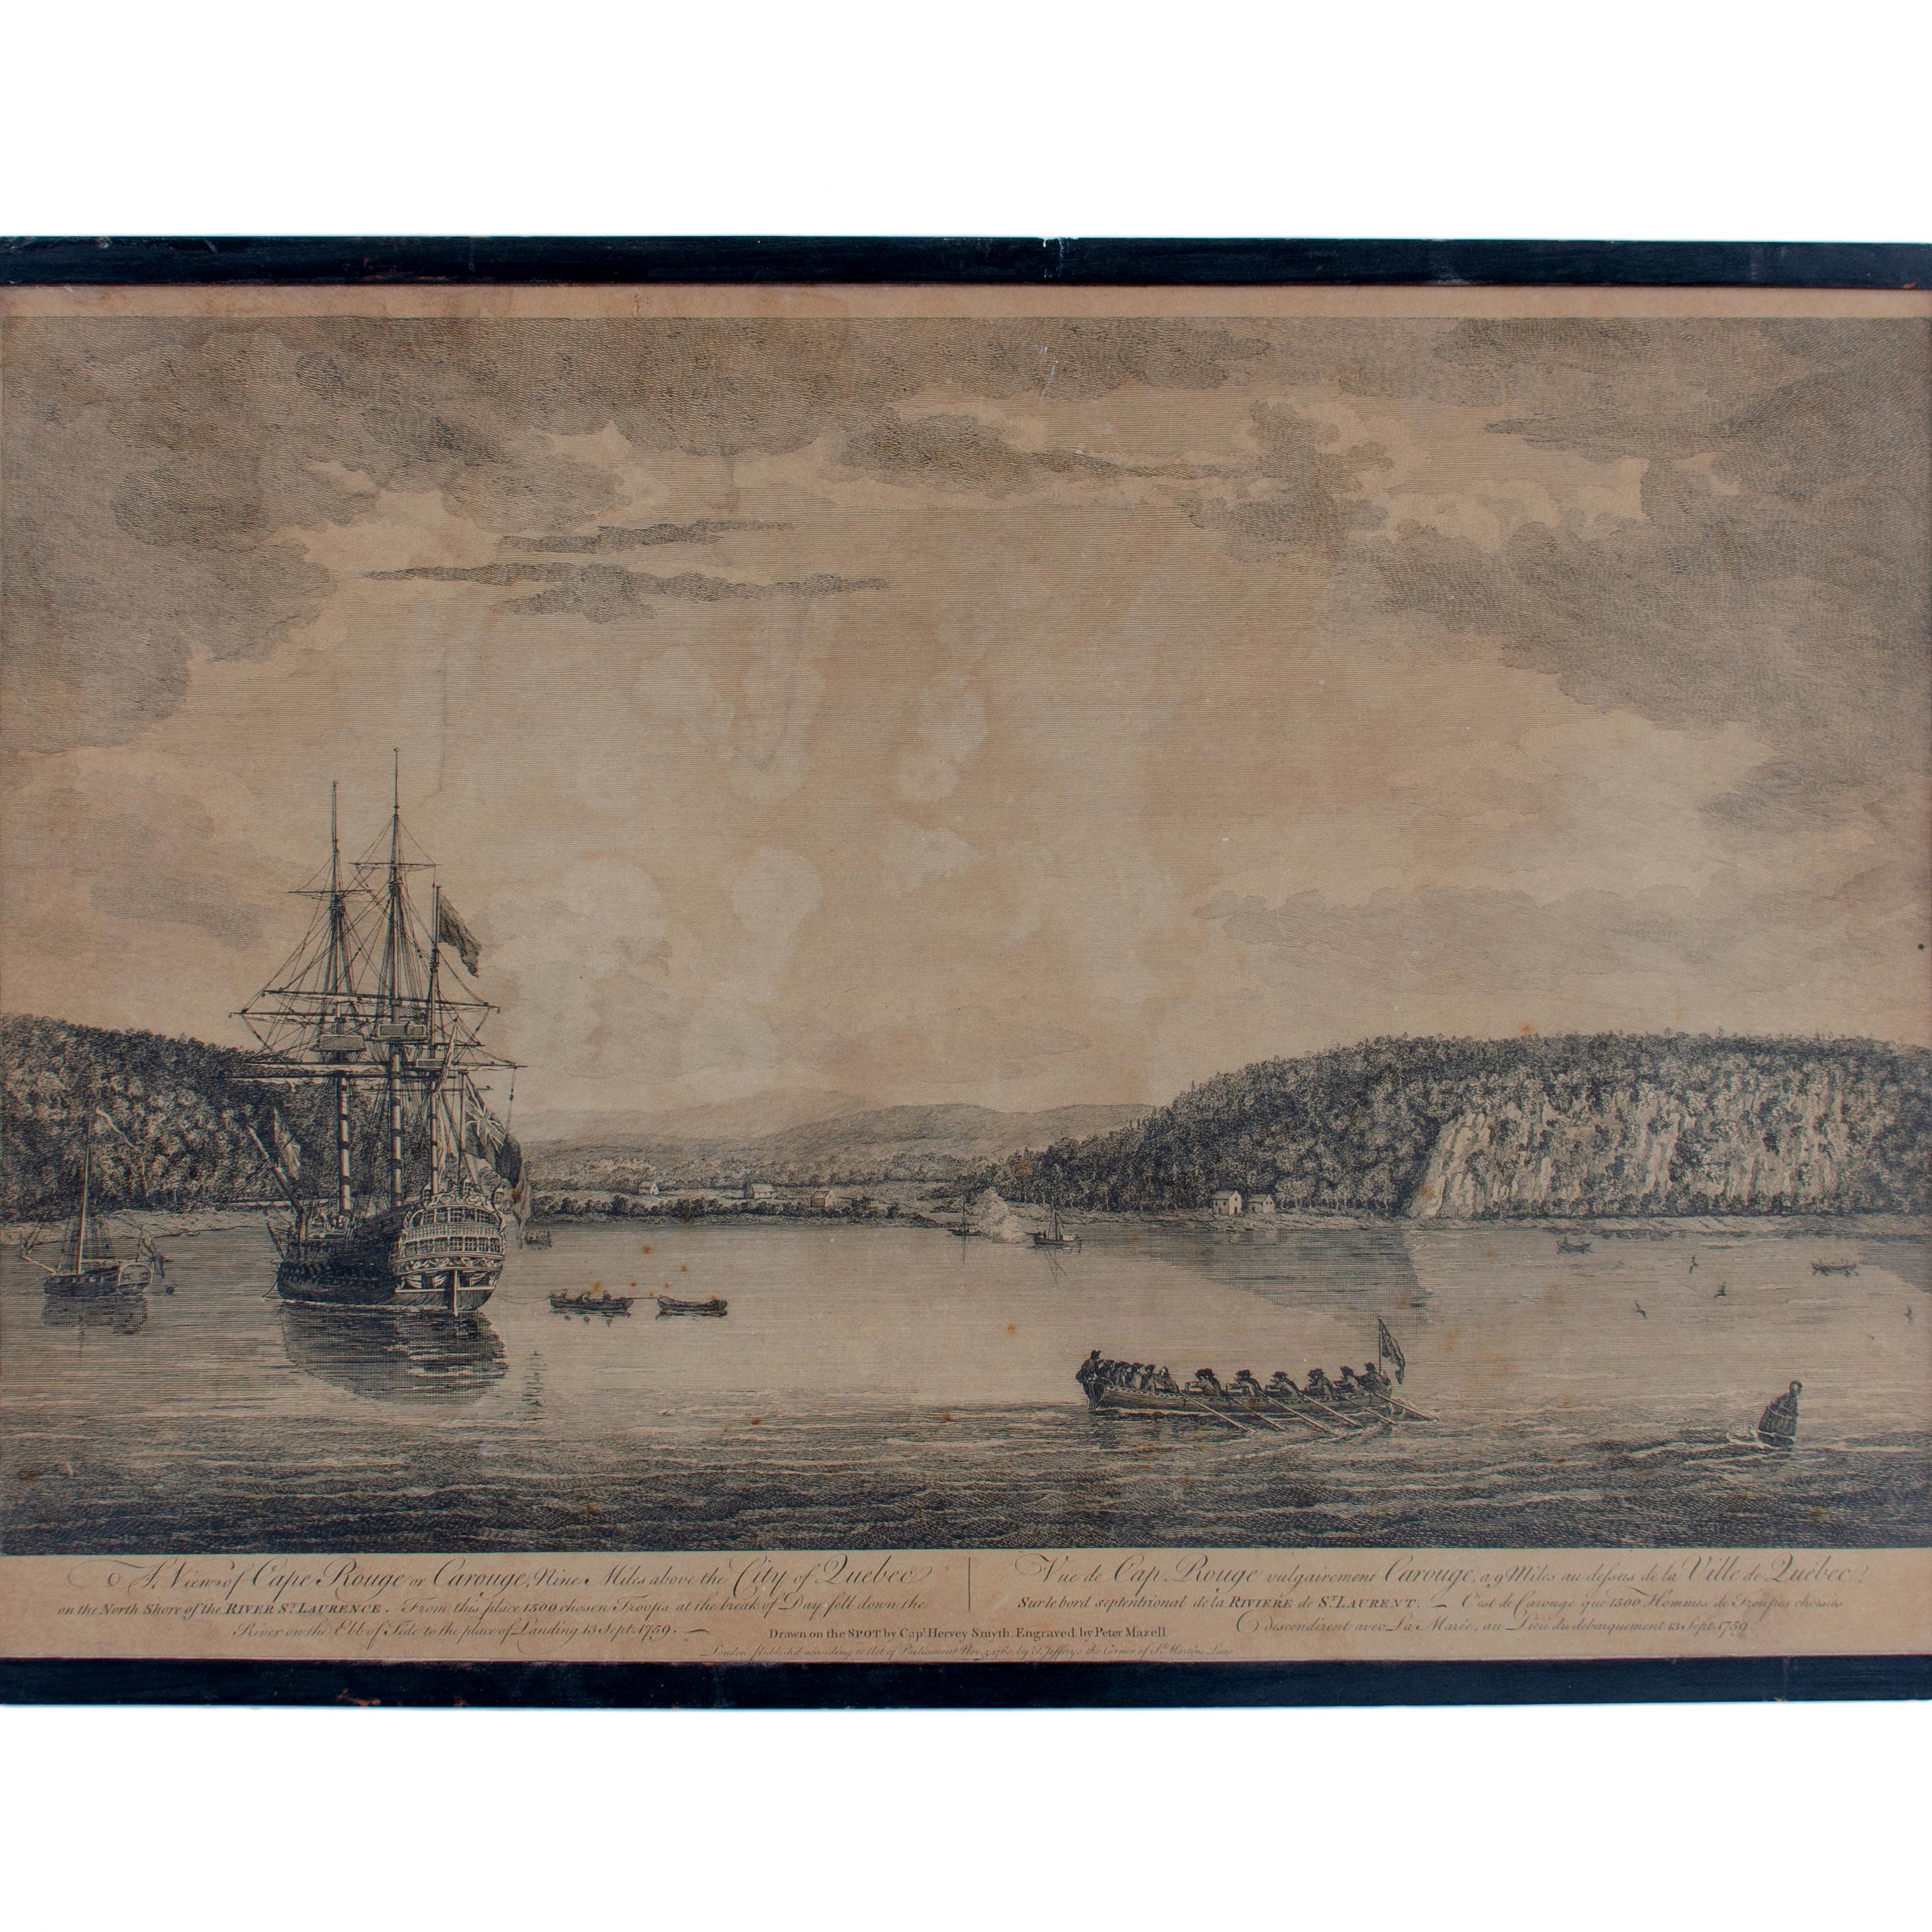 A View of Cape Rouge, or Carouge, on the Saint Lawrence River, north of Quebec.  

Engraving by Peter Mazell after a drawing by Captian Hervey Smyth, published c.1760's, London.  

The image depicts British troops in the water with flags flying set